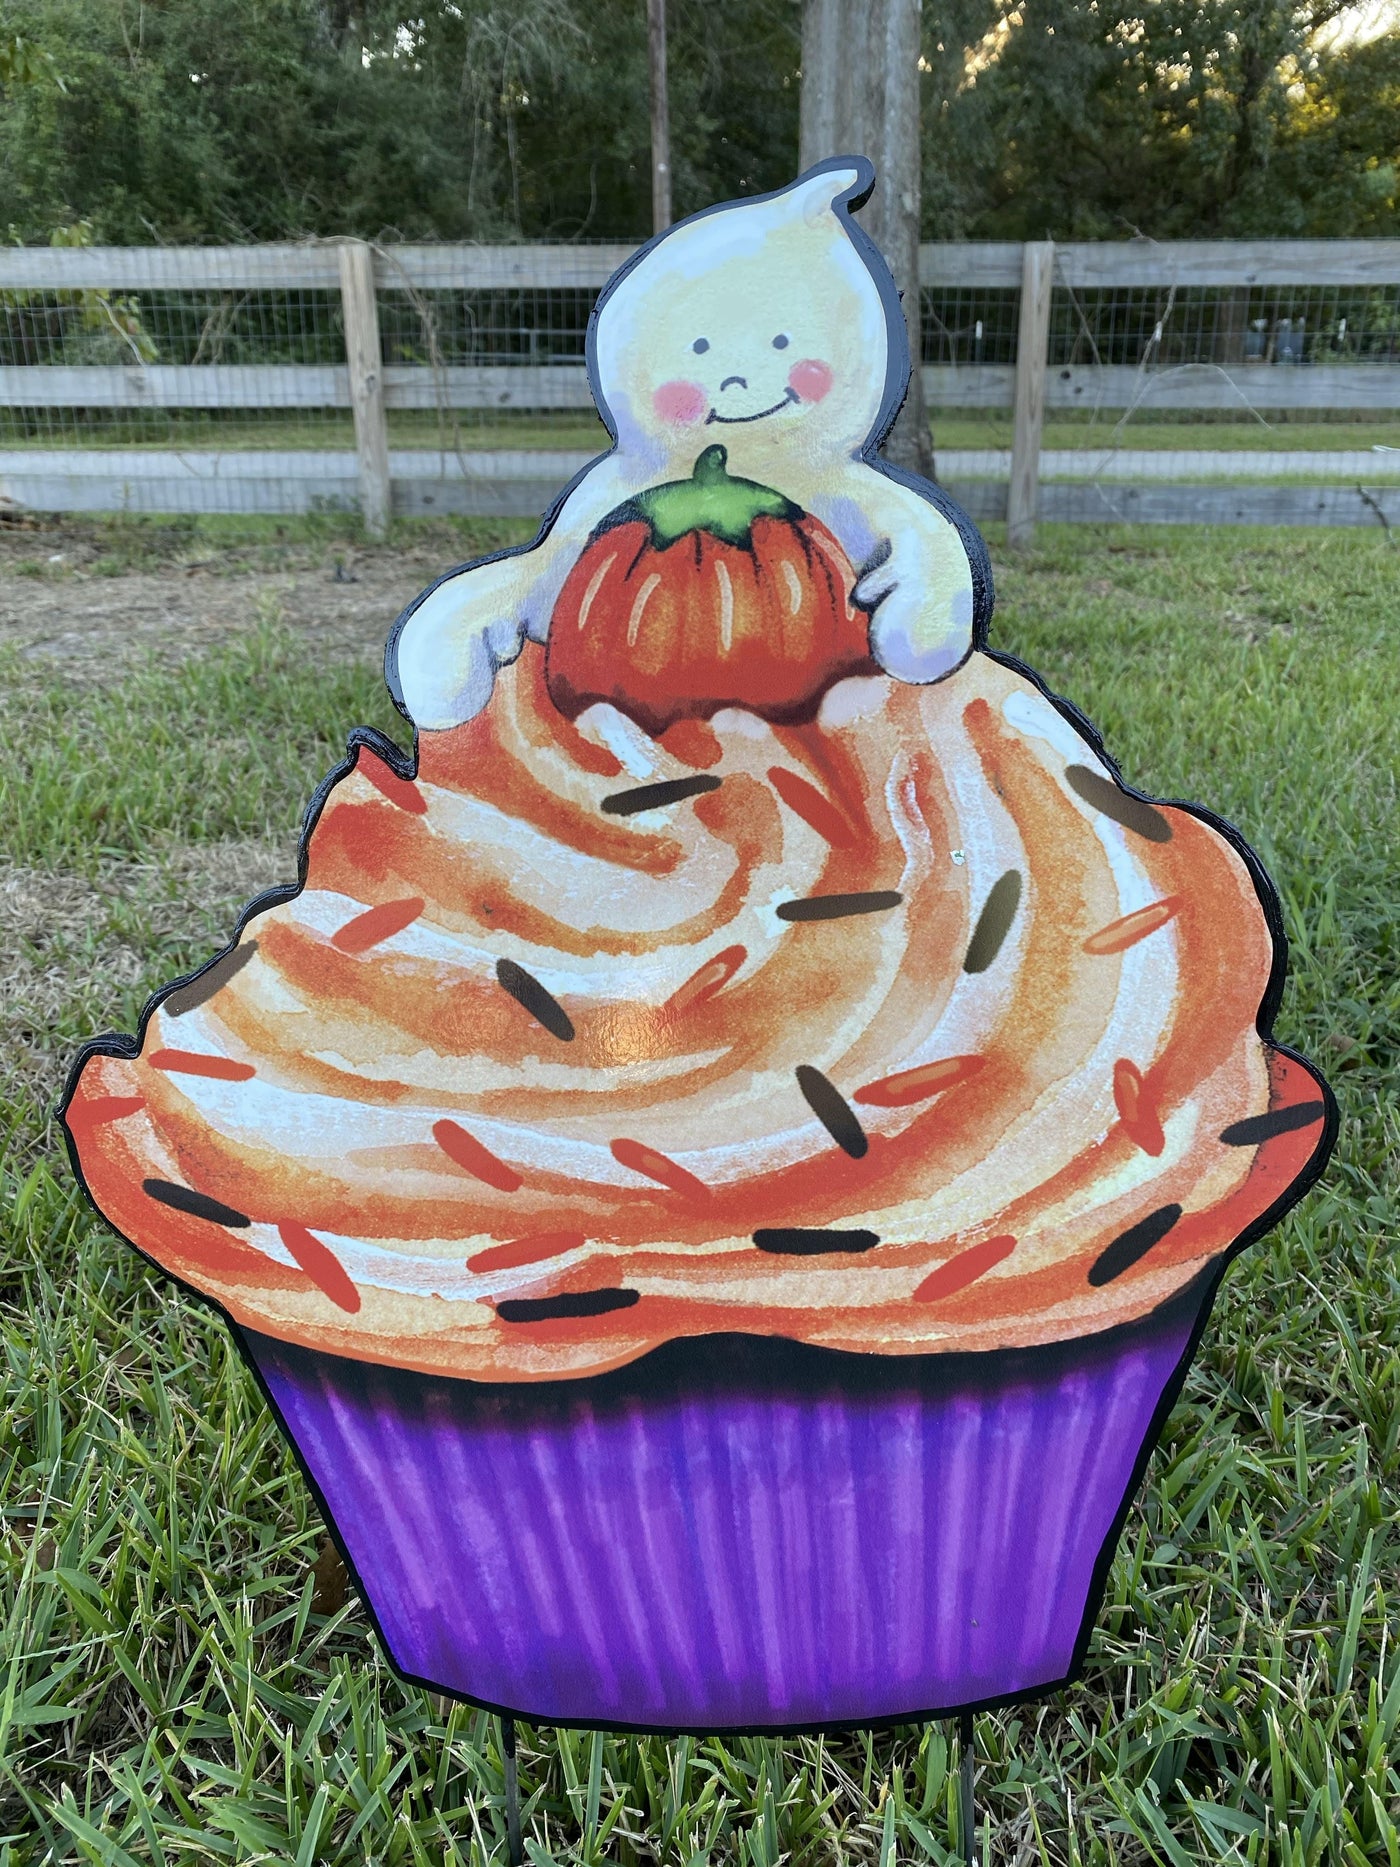 Cupcake with Sprinkles and Ghost Halloween Yard Art